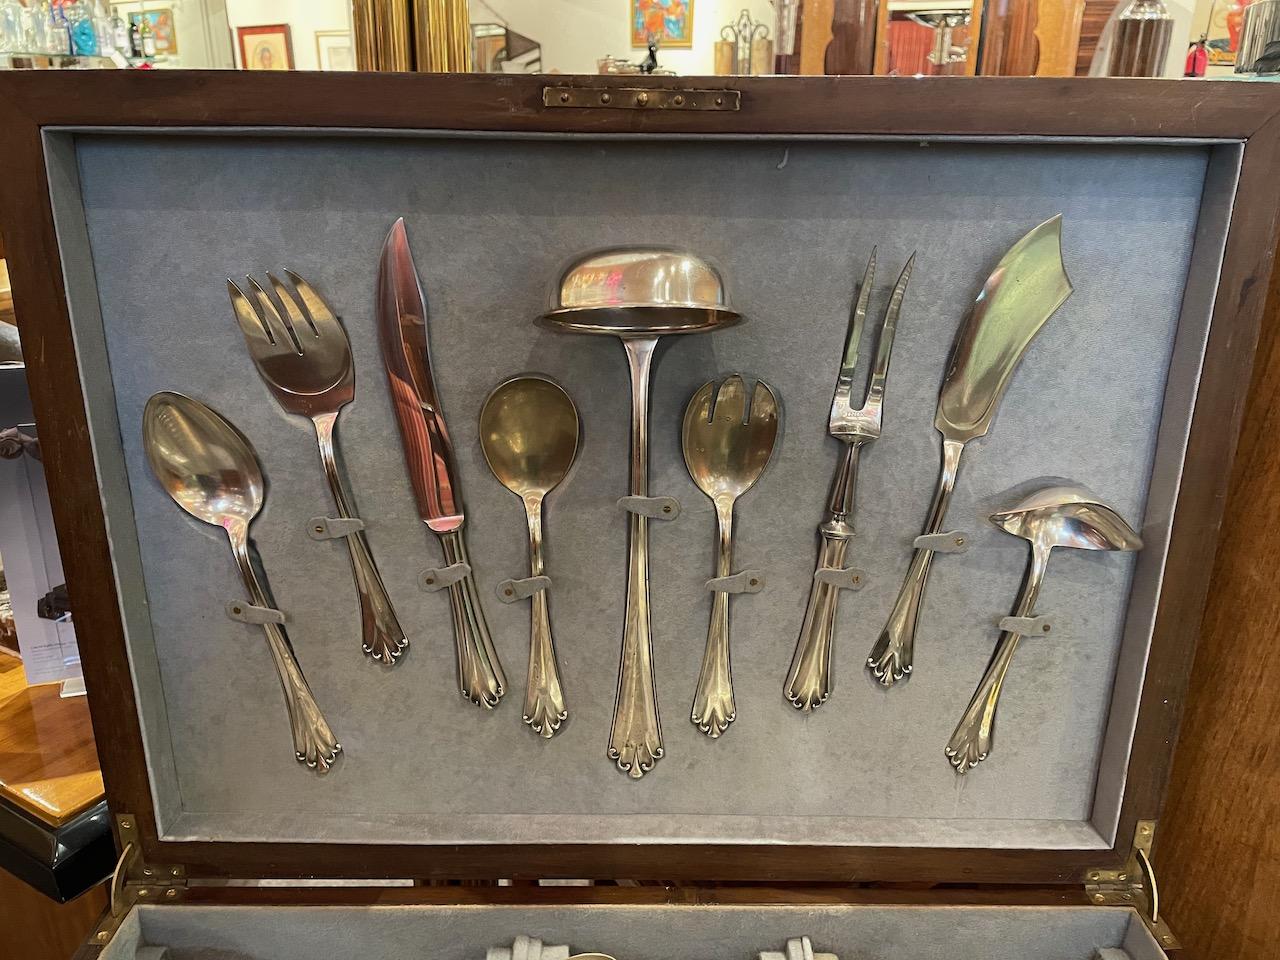 A set of silverware – in a lavishly complete service for 12 that includes a wide array of serving pieces all nestled in a fitted chest that also is used as a small table. Made in the the1920s and imported from France, the case is done in a sleek Art